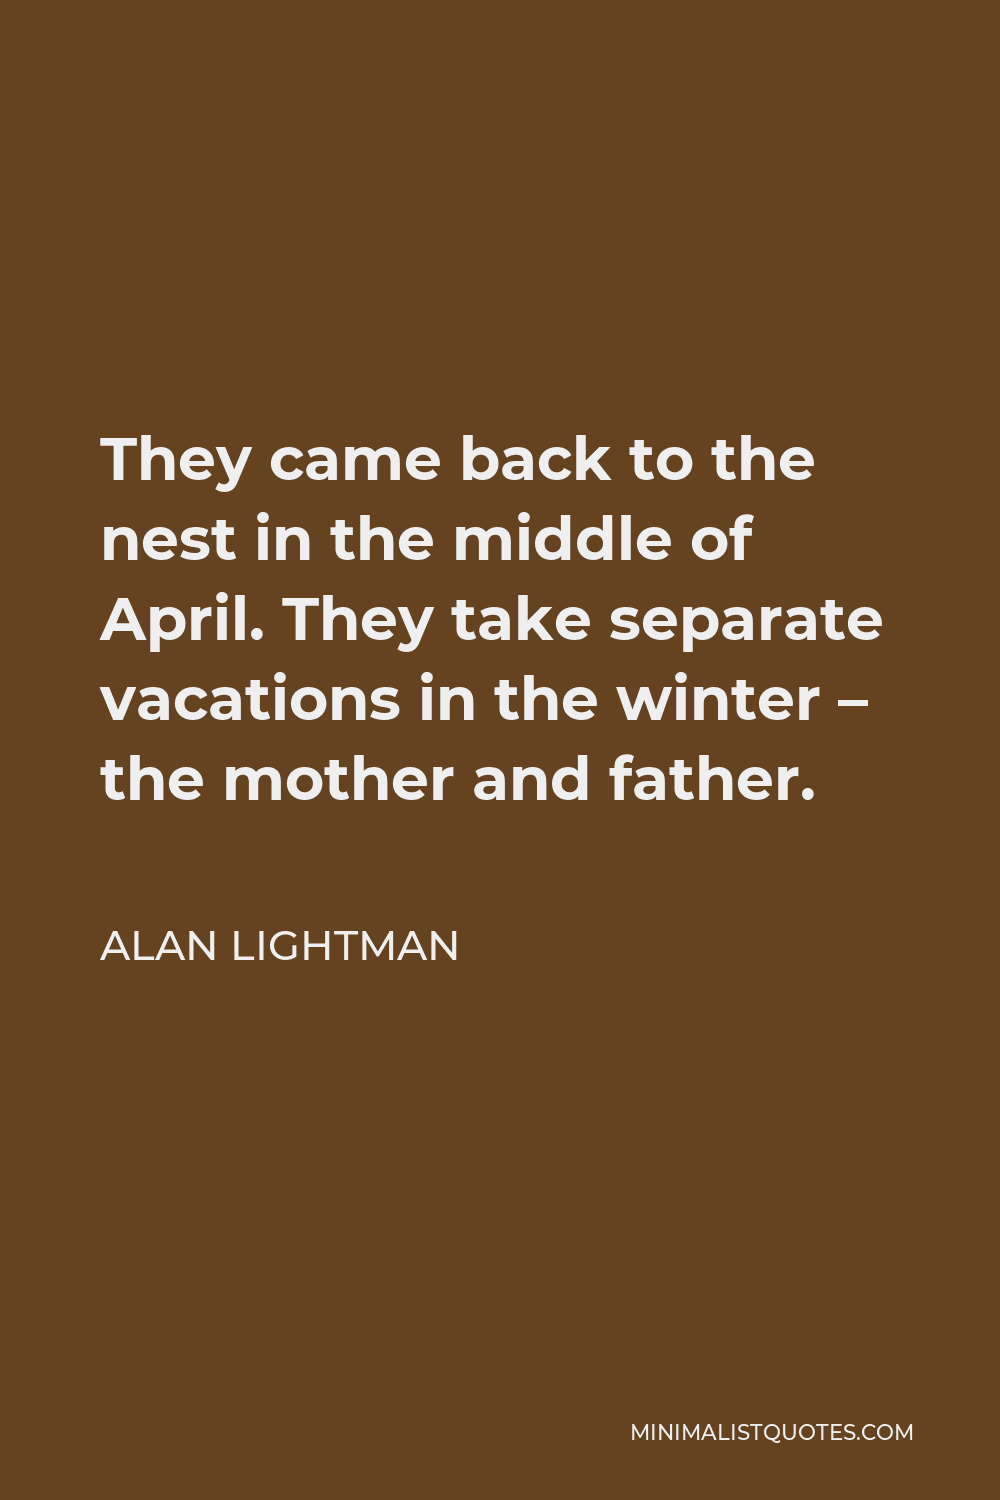 Alan Lightman Quote - They came back to the nest in the middle of April. They take separate vacations in the winter – the mother and father.